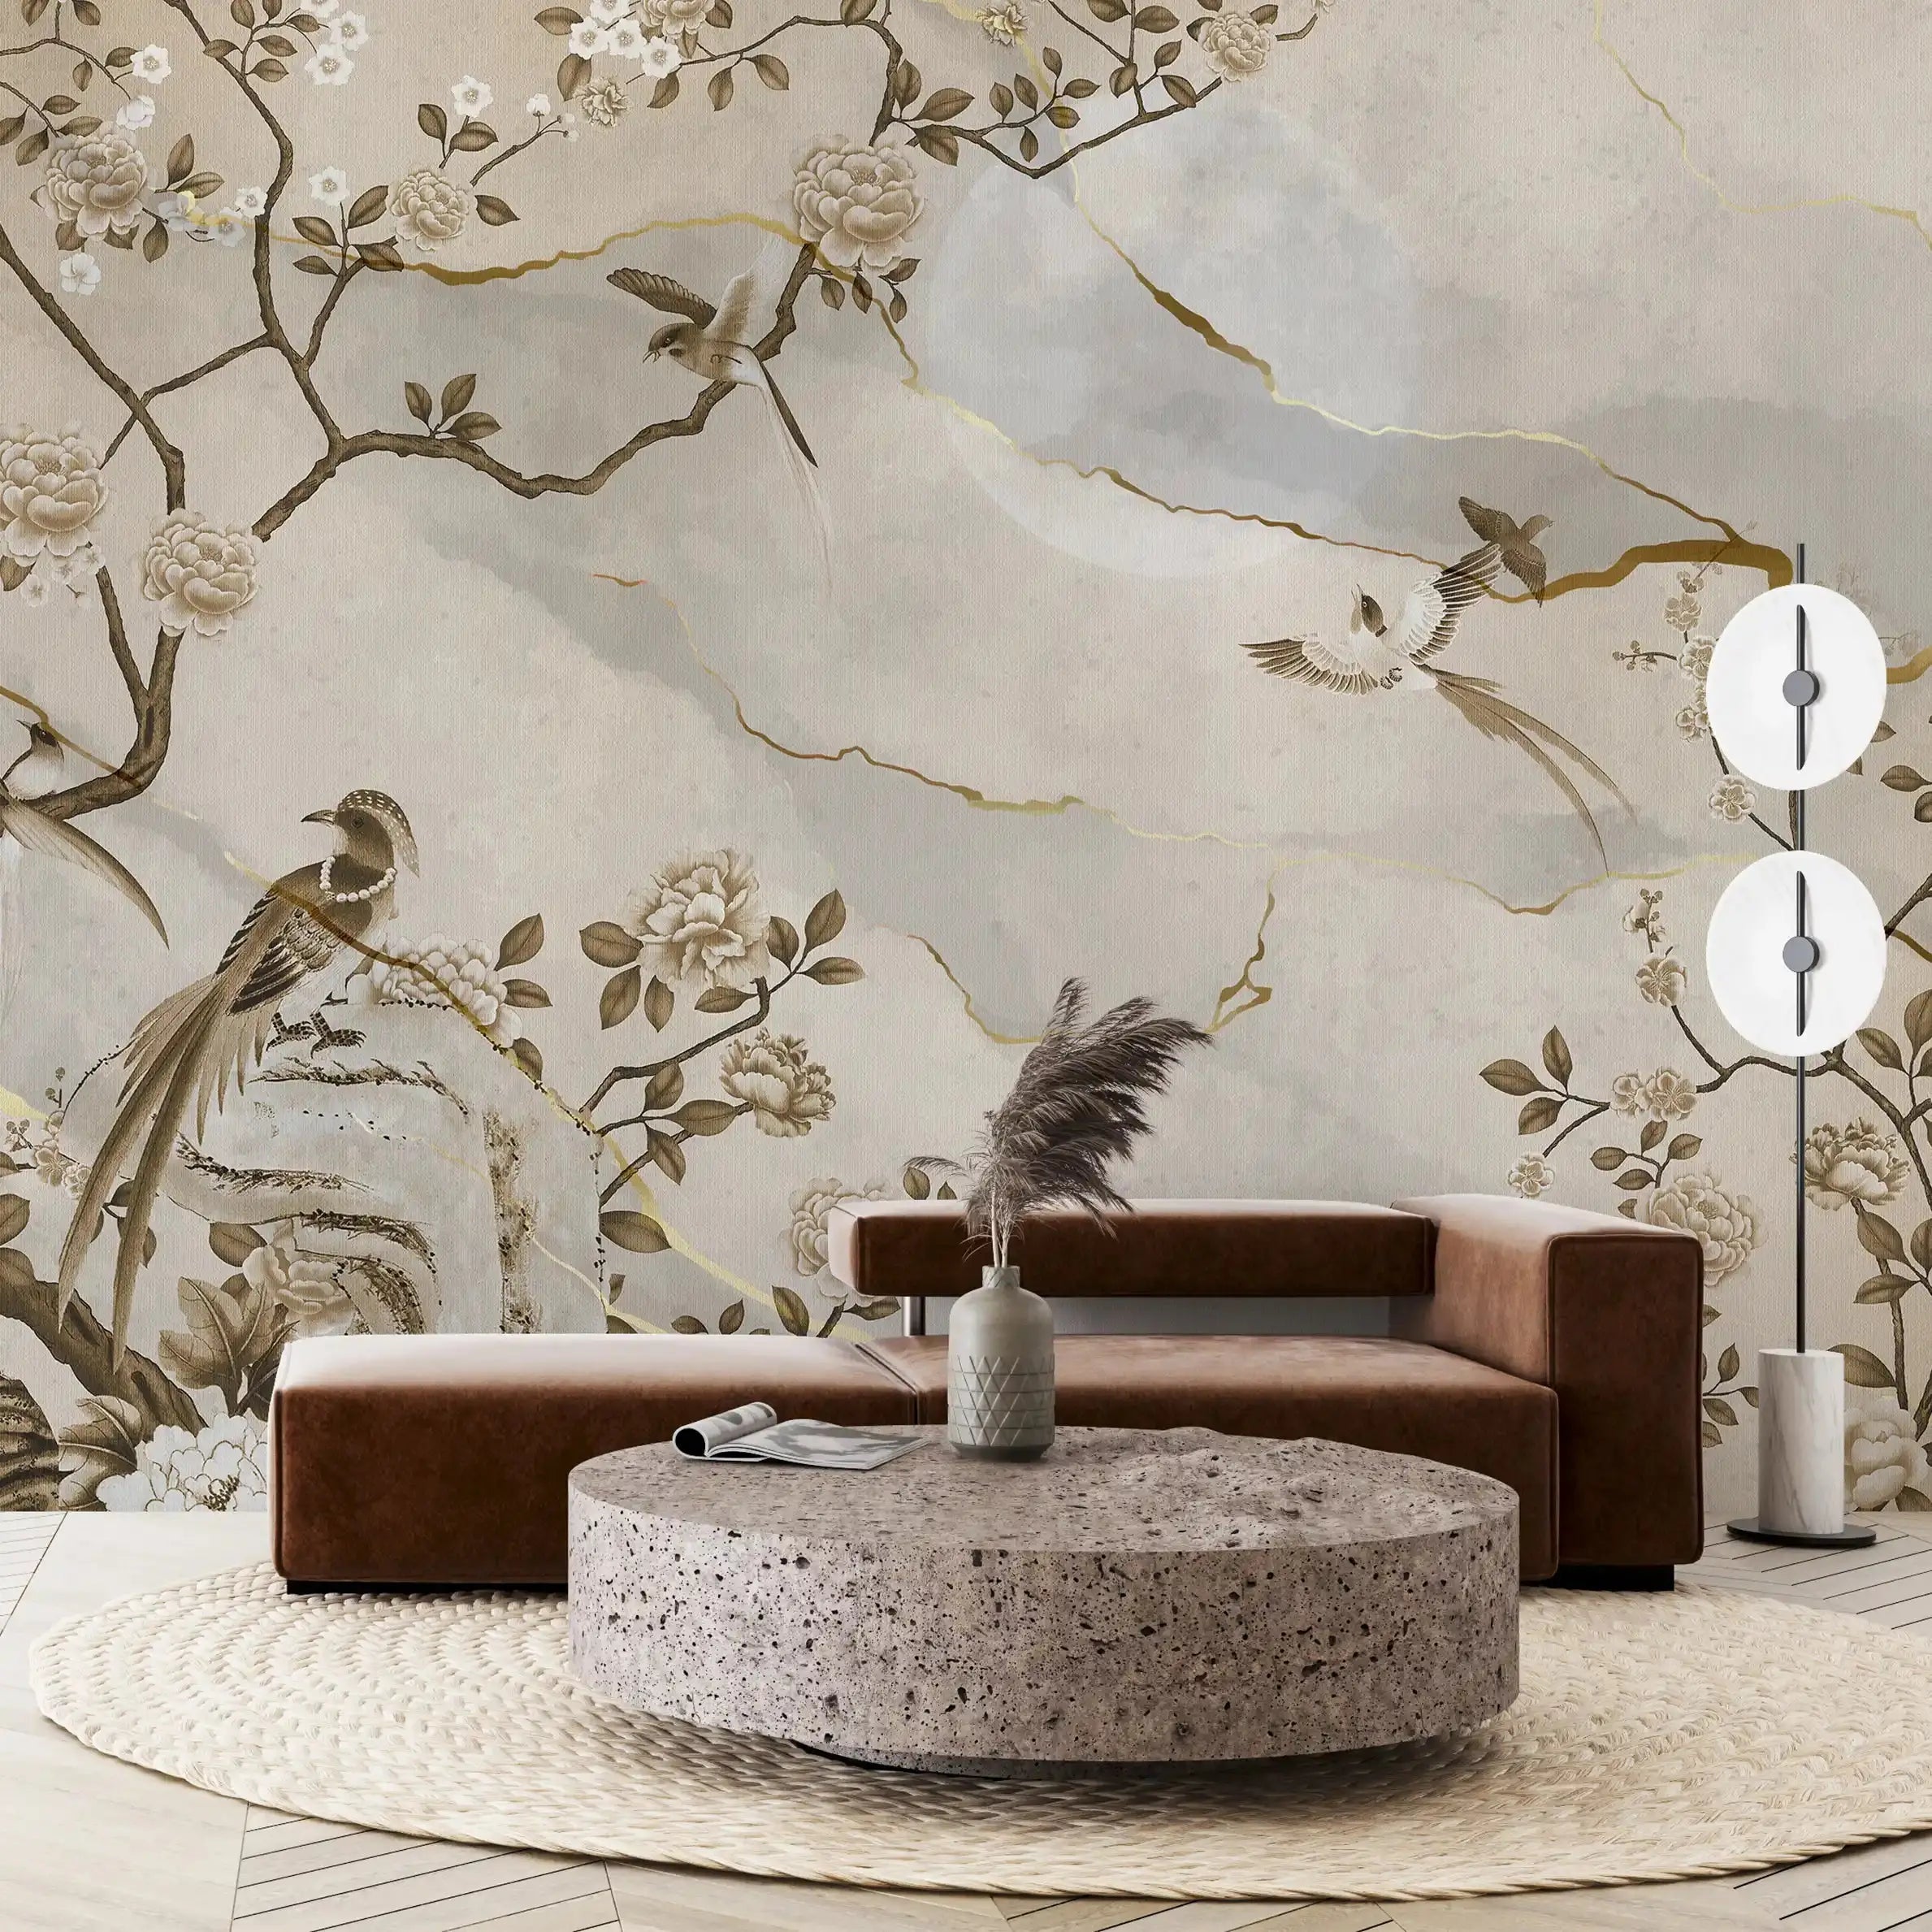 3055-D / Removable Wallpaper Peel and Stick - Chinese Painting, Vintage Floral Mural, Birds Natural Design, Easy Install, Boho Style - Artevella